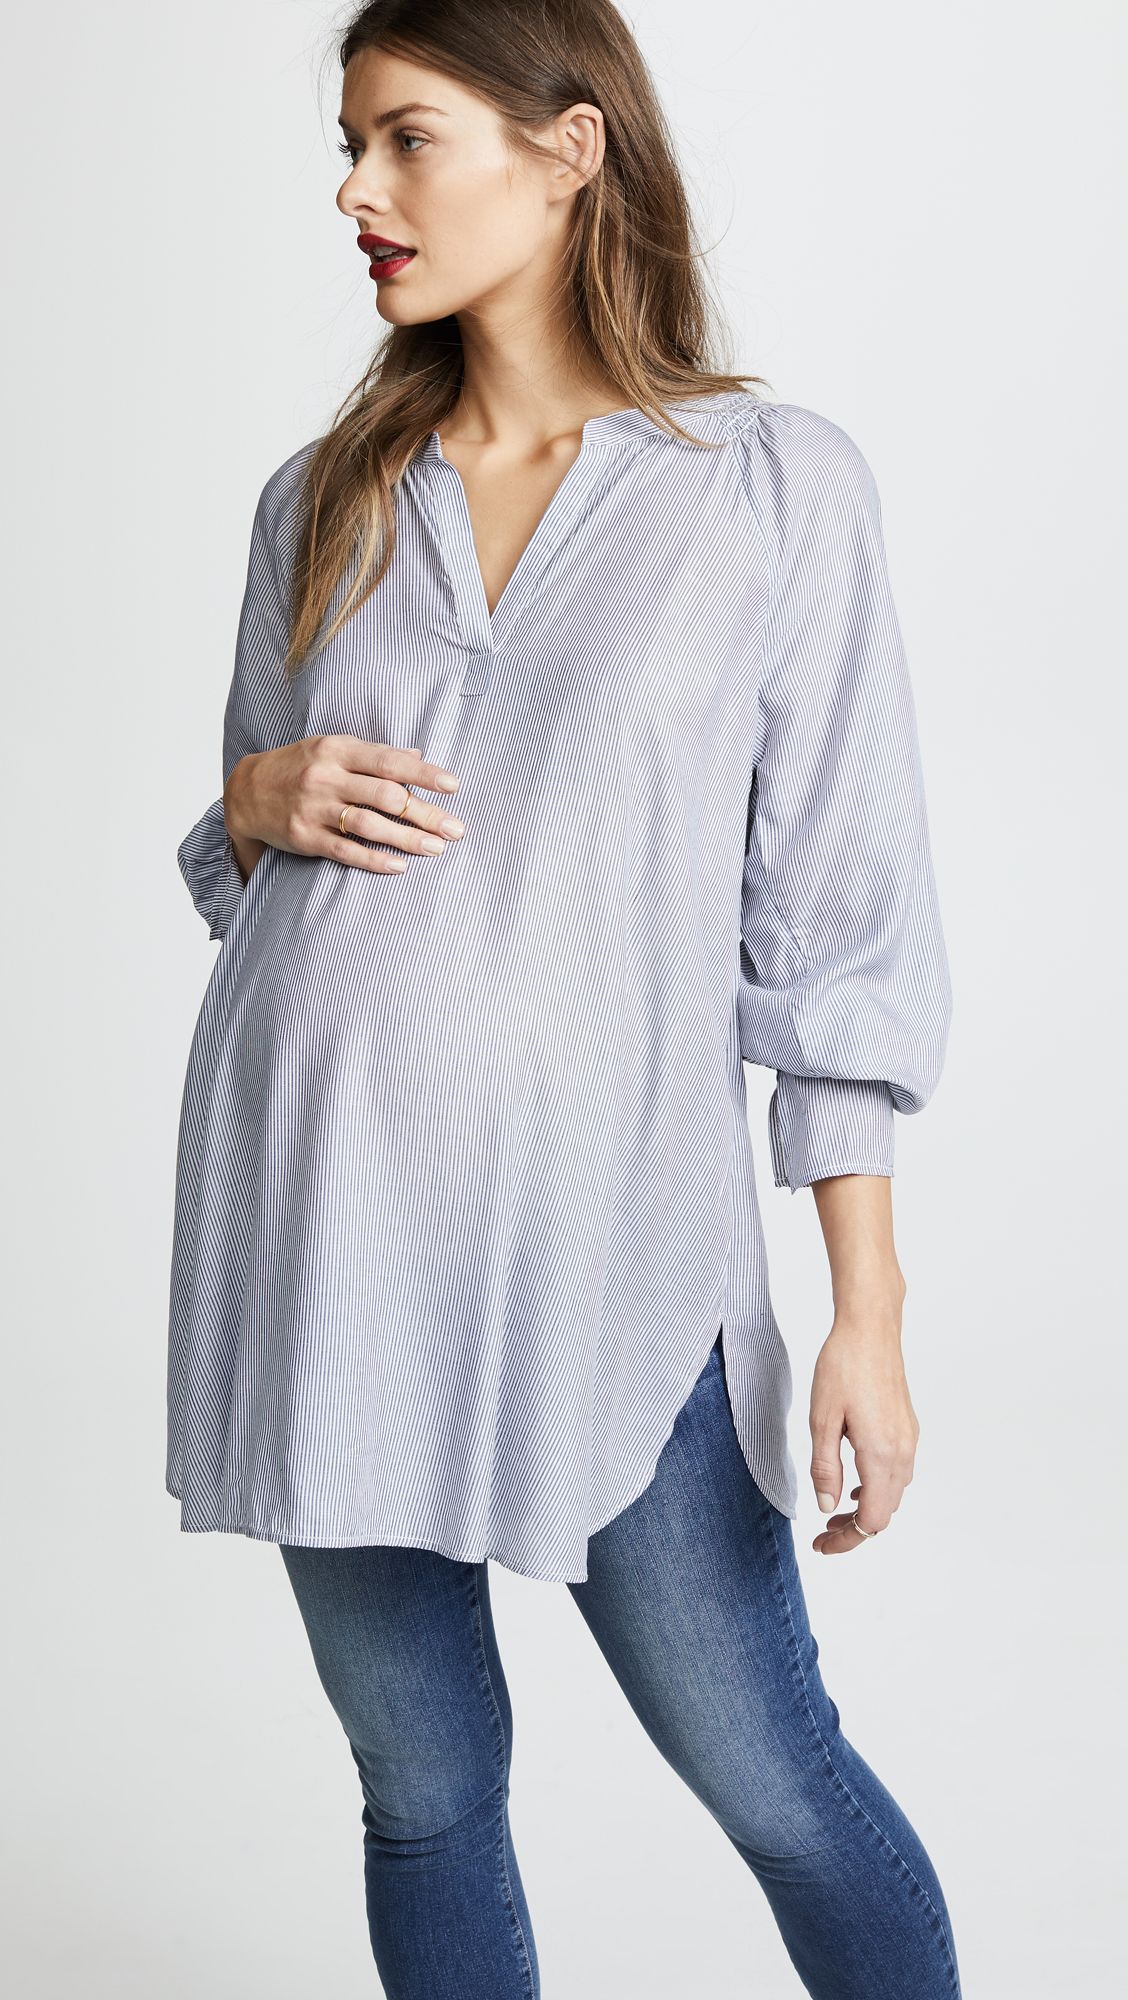 The Best New Maternity Brands | Who What Wear